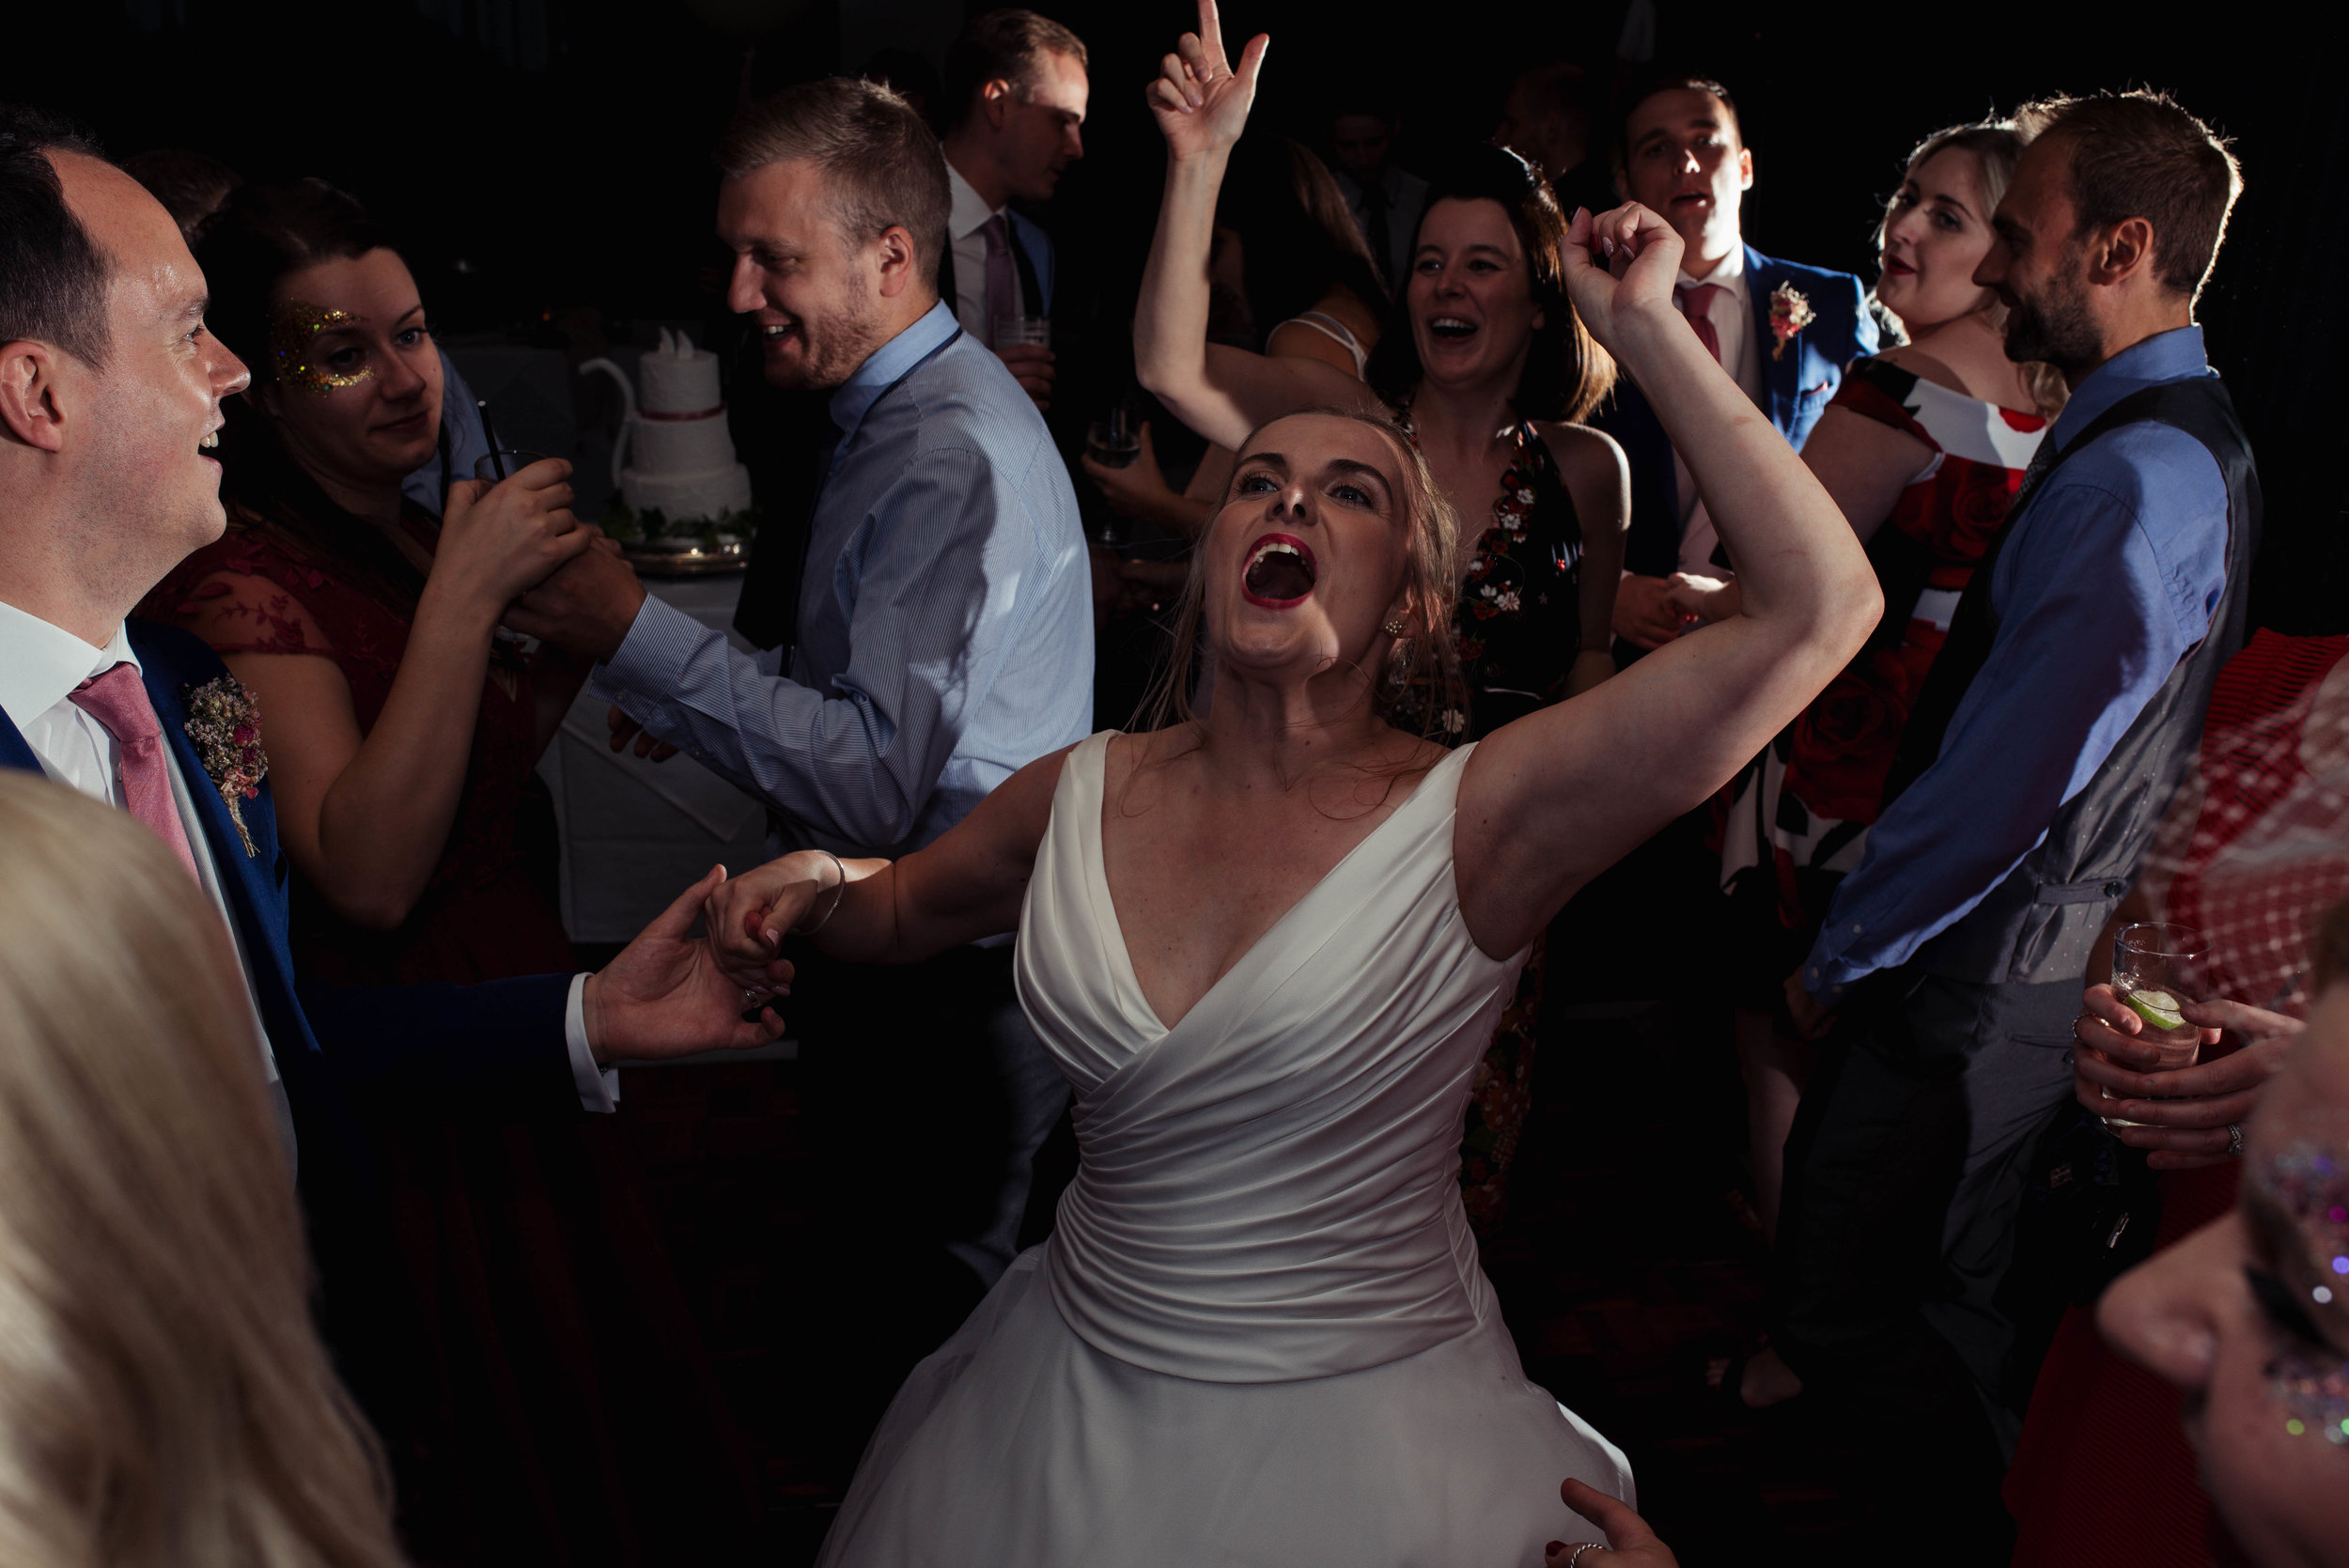 The bride letting her hair down with her friends on the dance floor